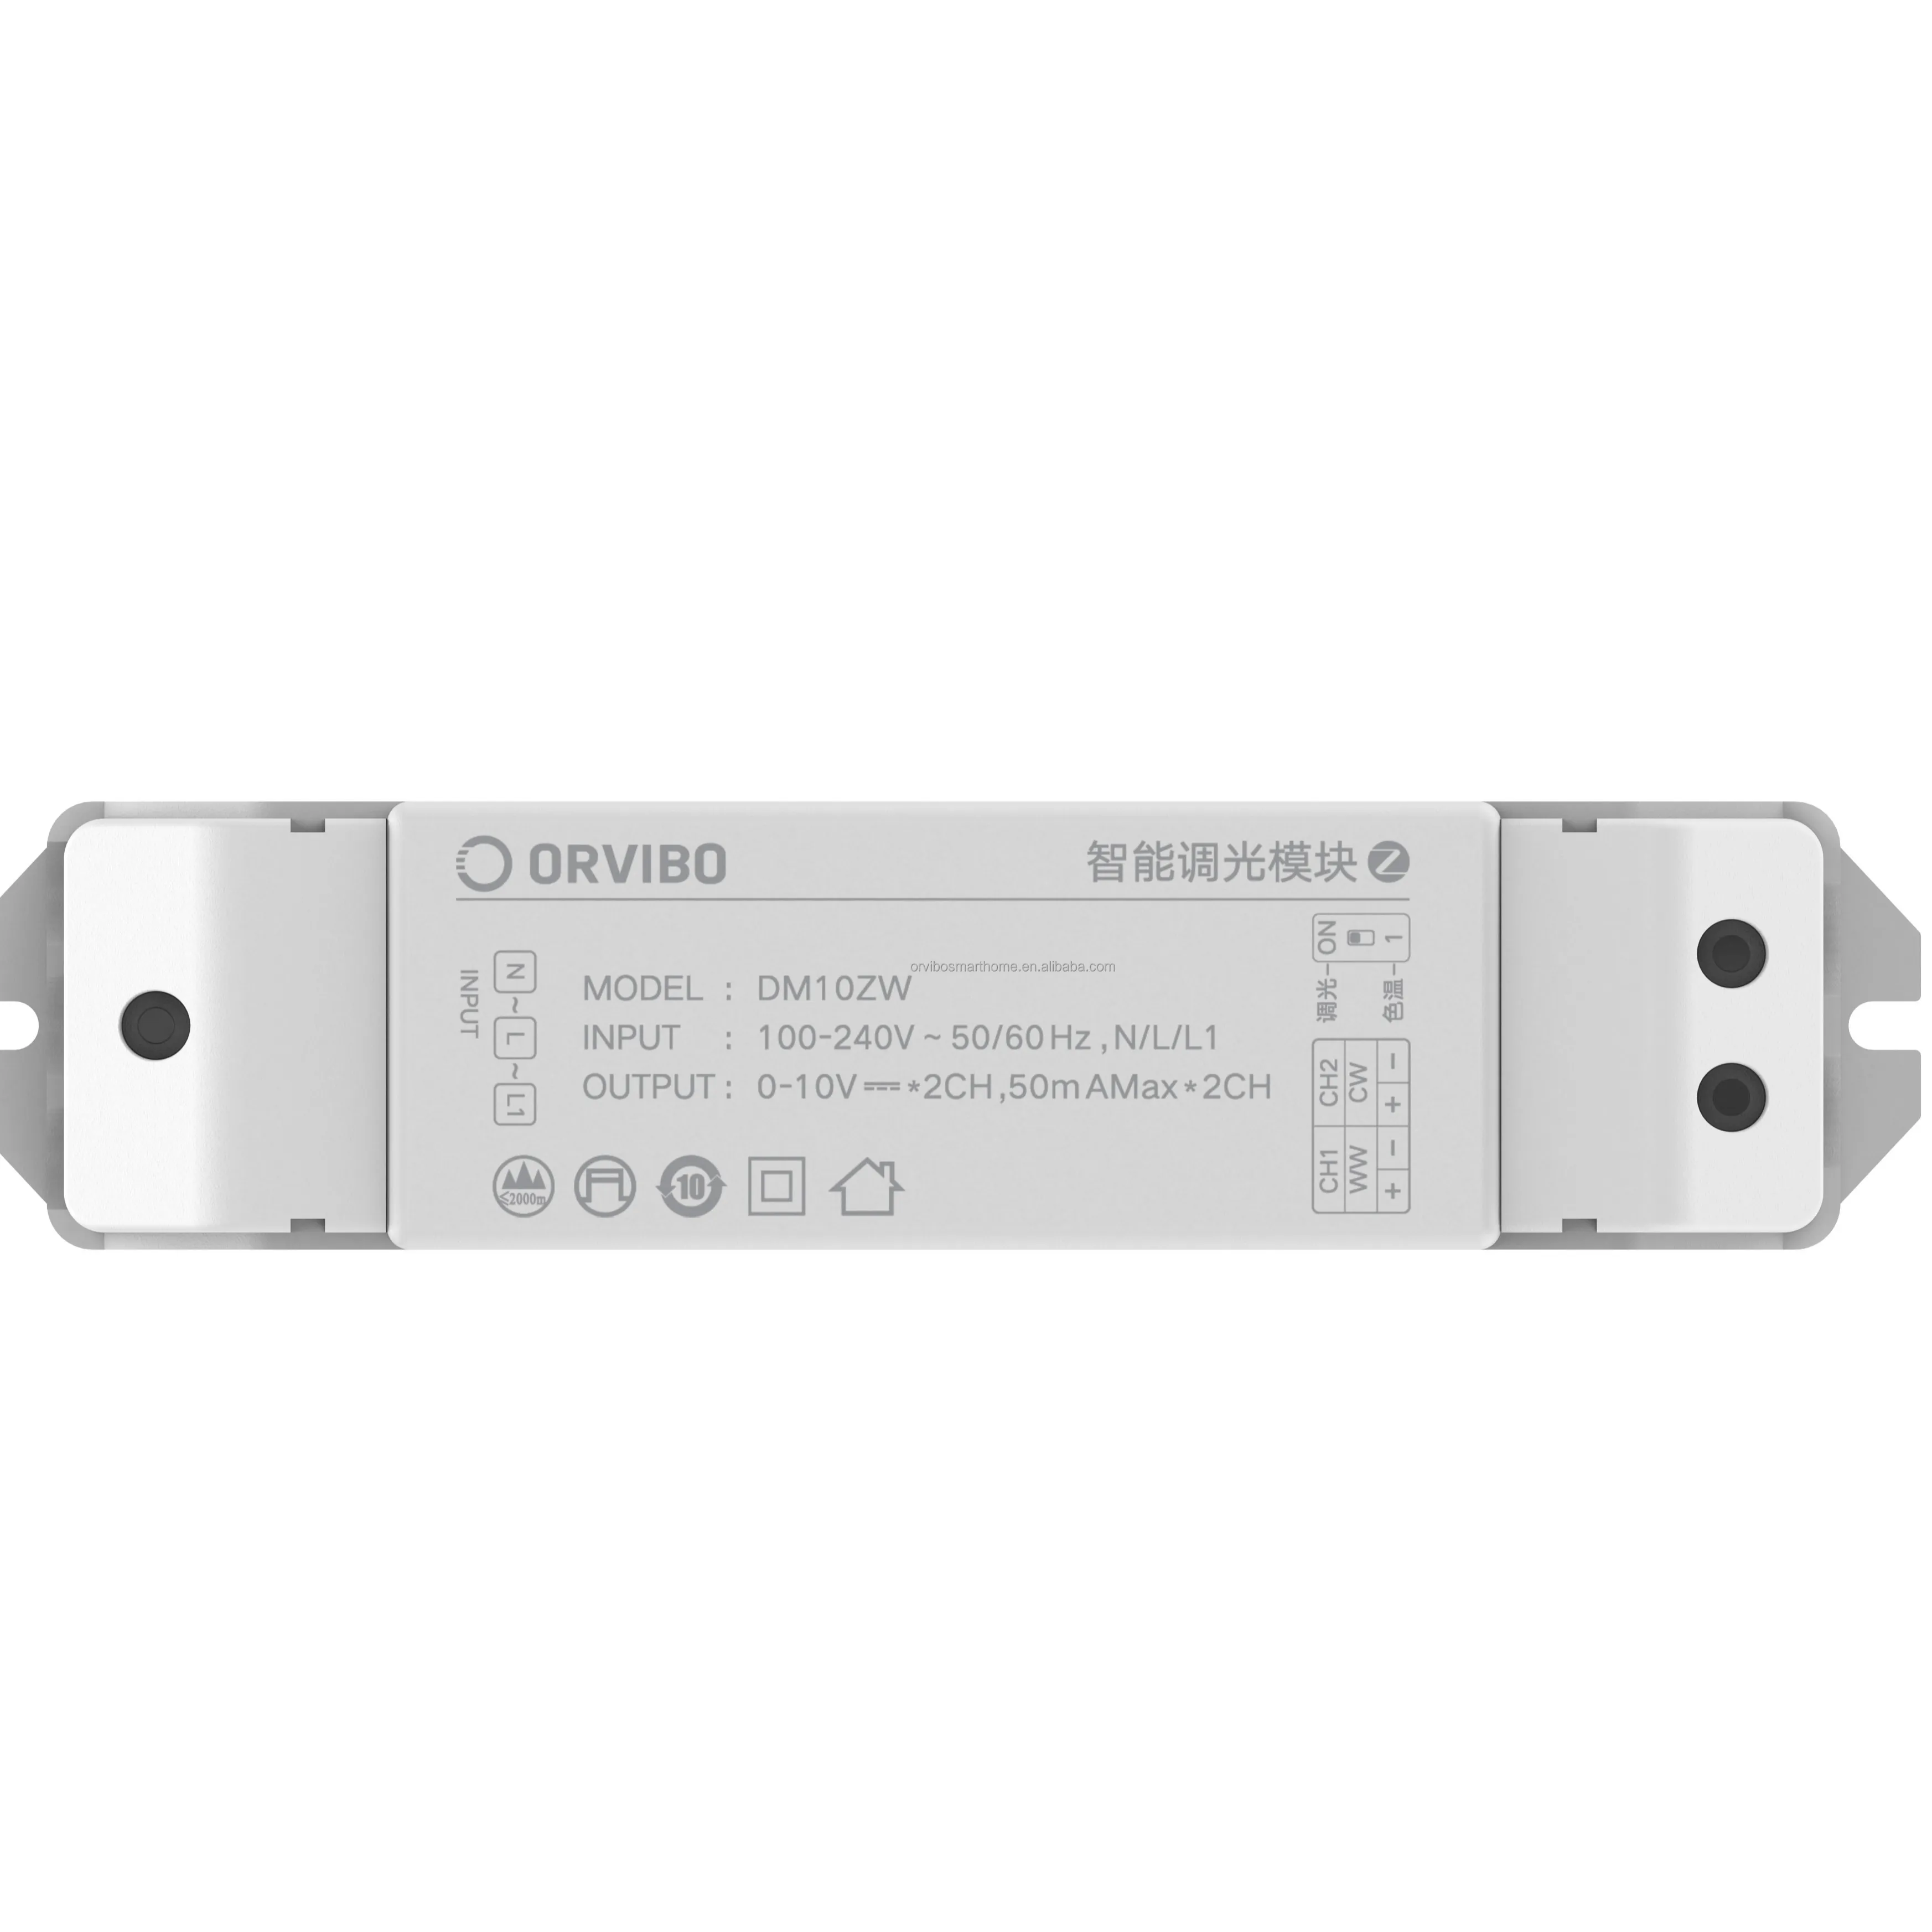 ORVIBO 0-10V Zigbee Smart LED Dimmer 2.4g rf wireless touch remote control mini dimmer controller